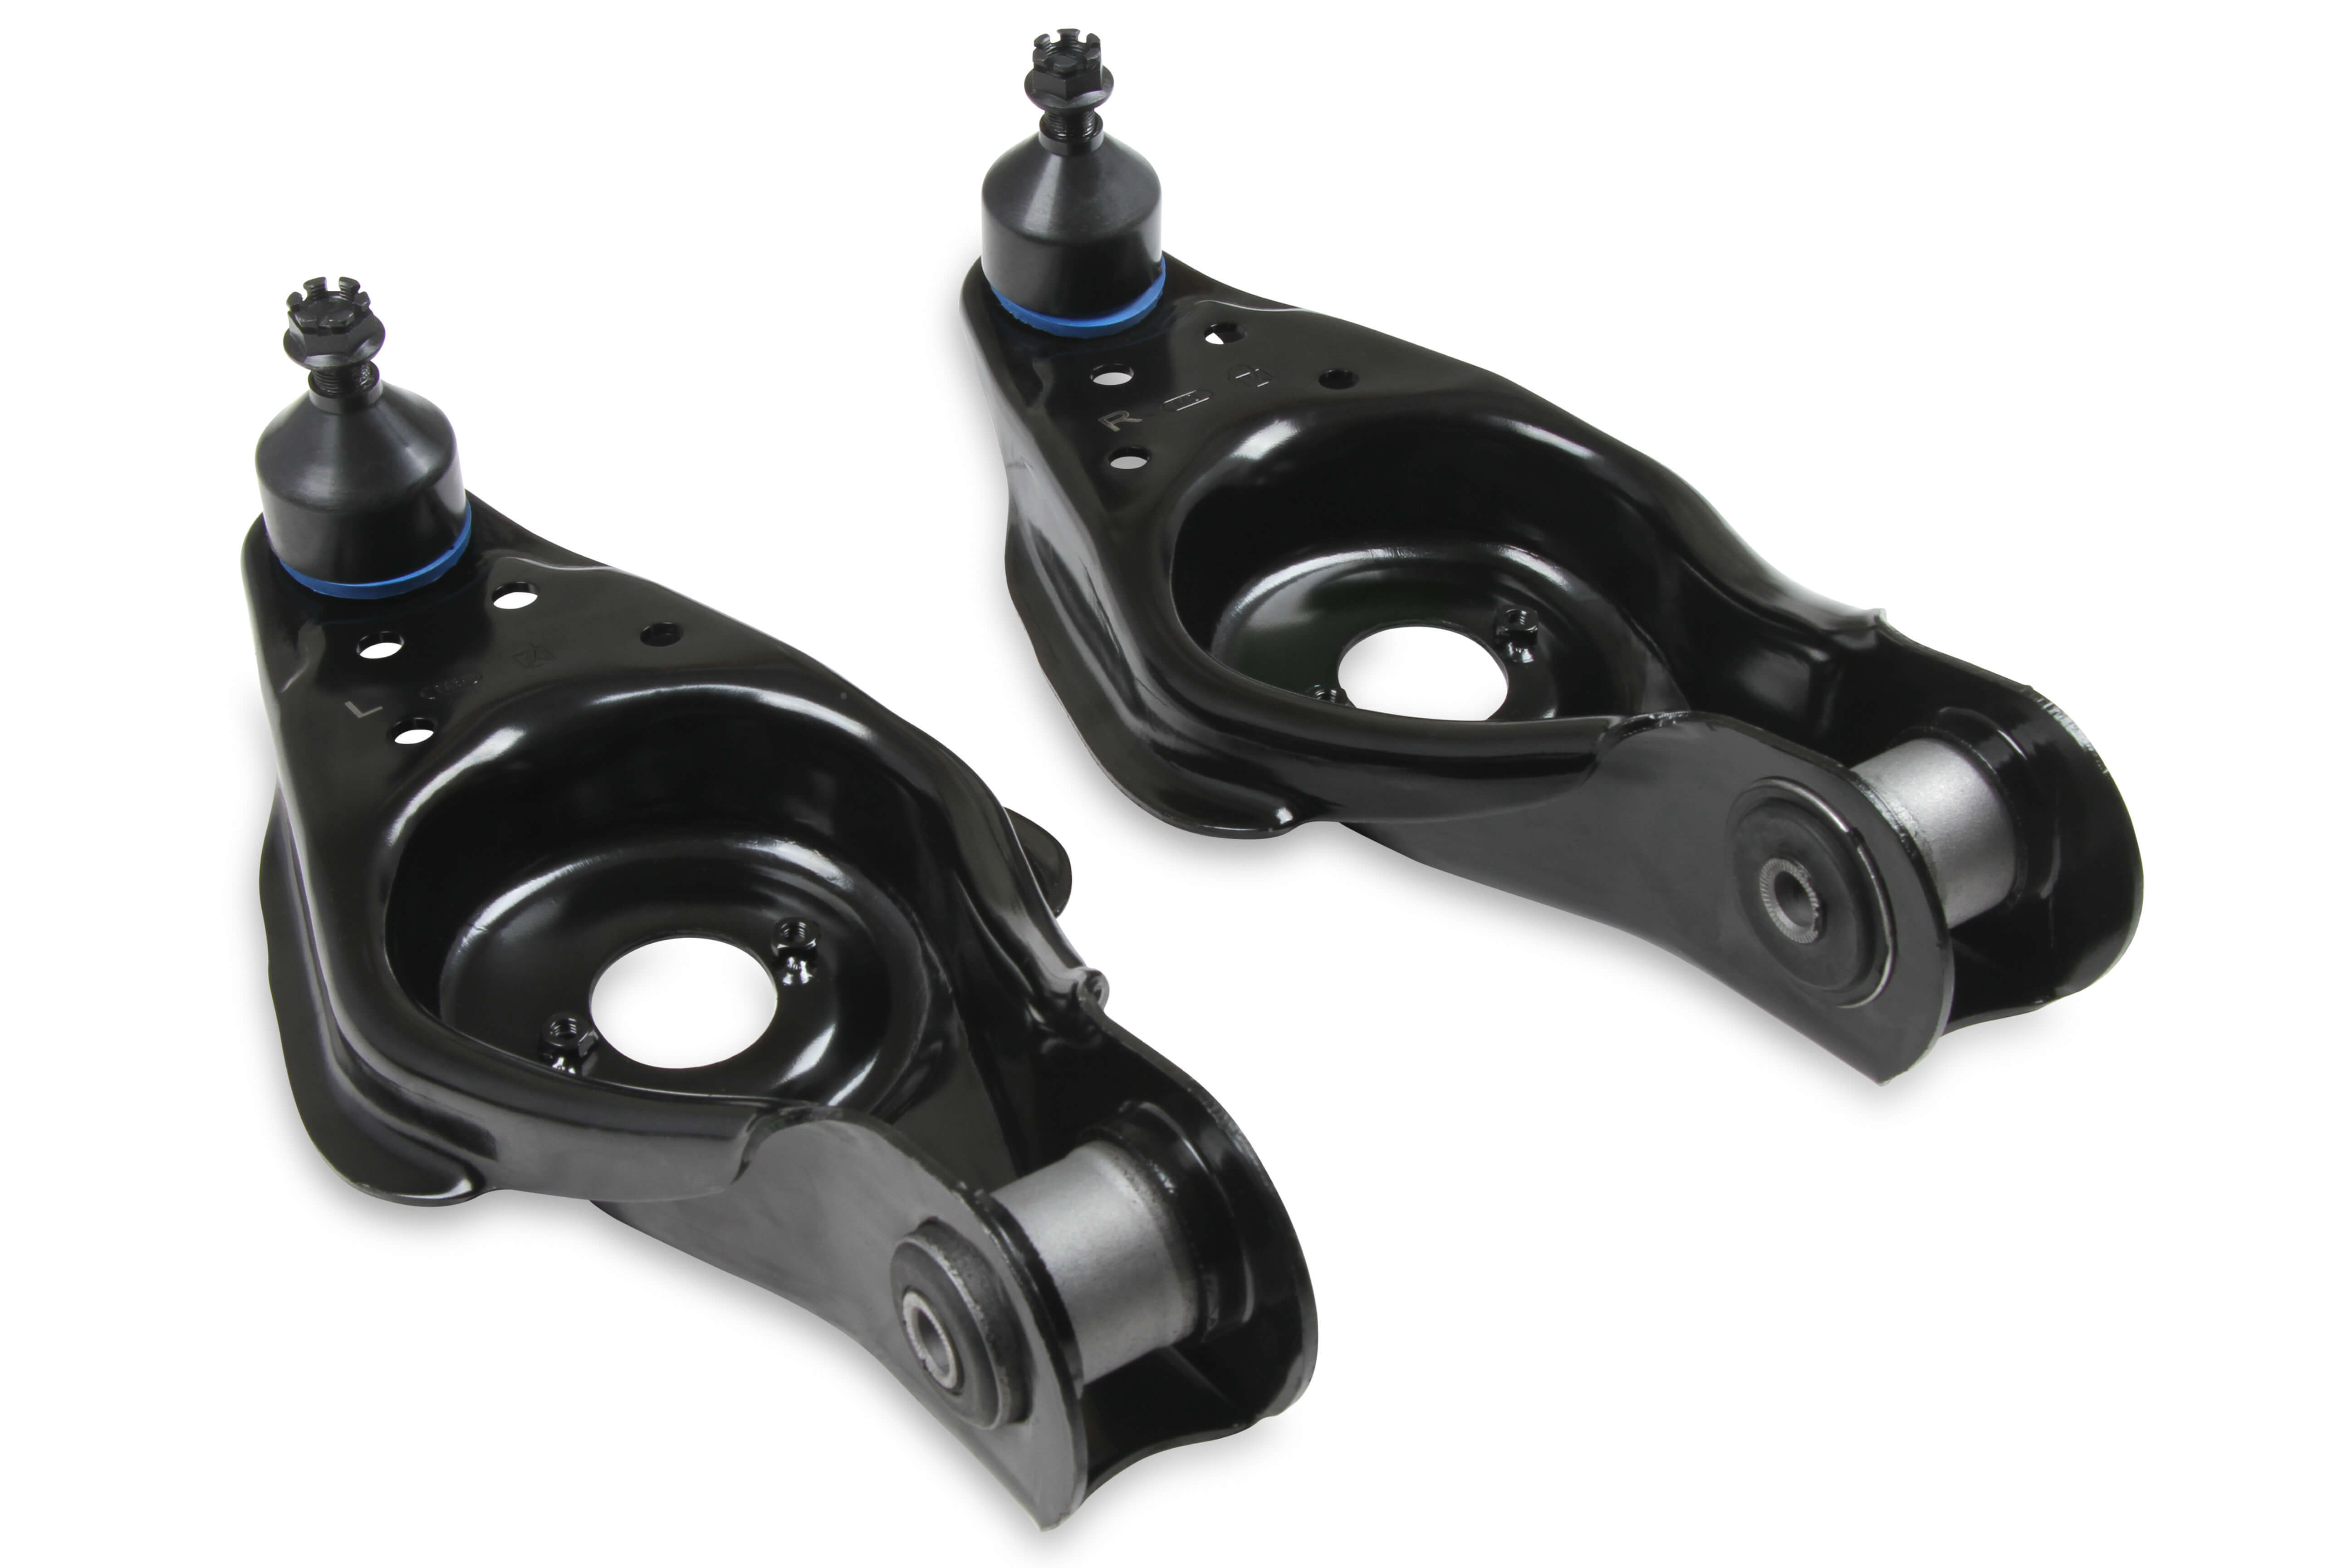 Rekudo RK100-27 Control Arm, Stamped, Driver / Passenger Side, Lower, Press-In Ball Joints, Steel, Black Paint, Dodge Fullsize Truck 1972-93, Pair